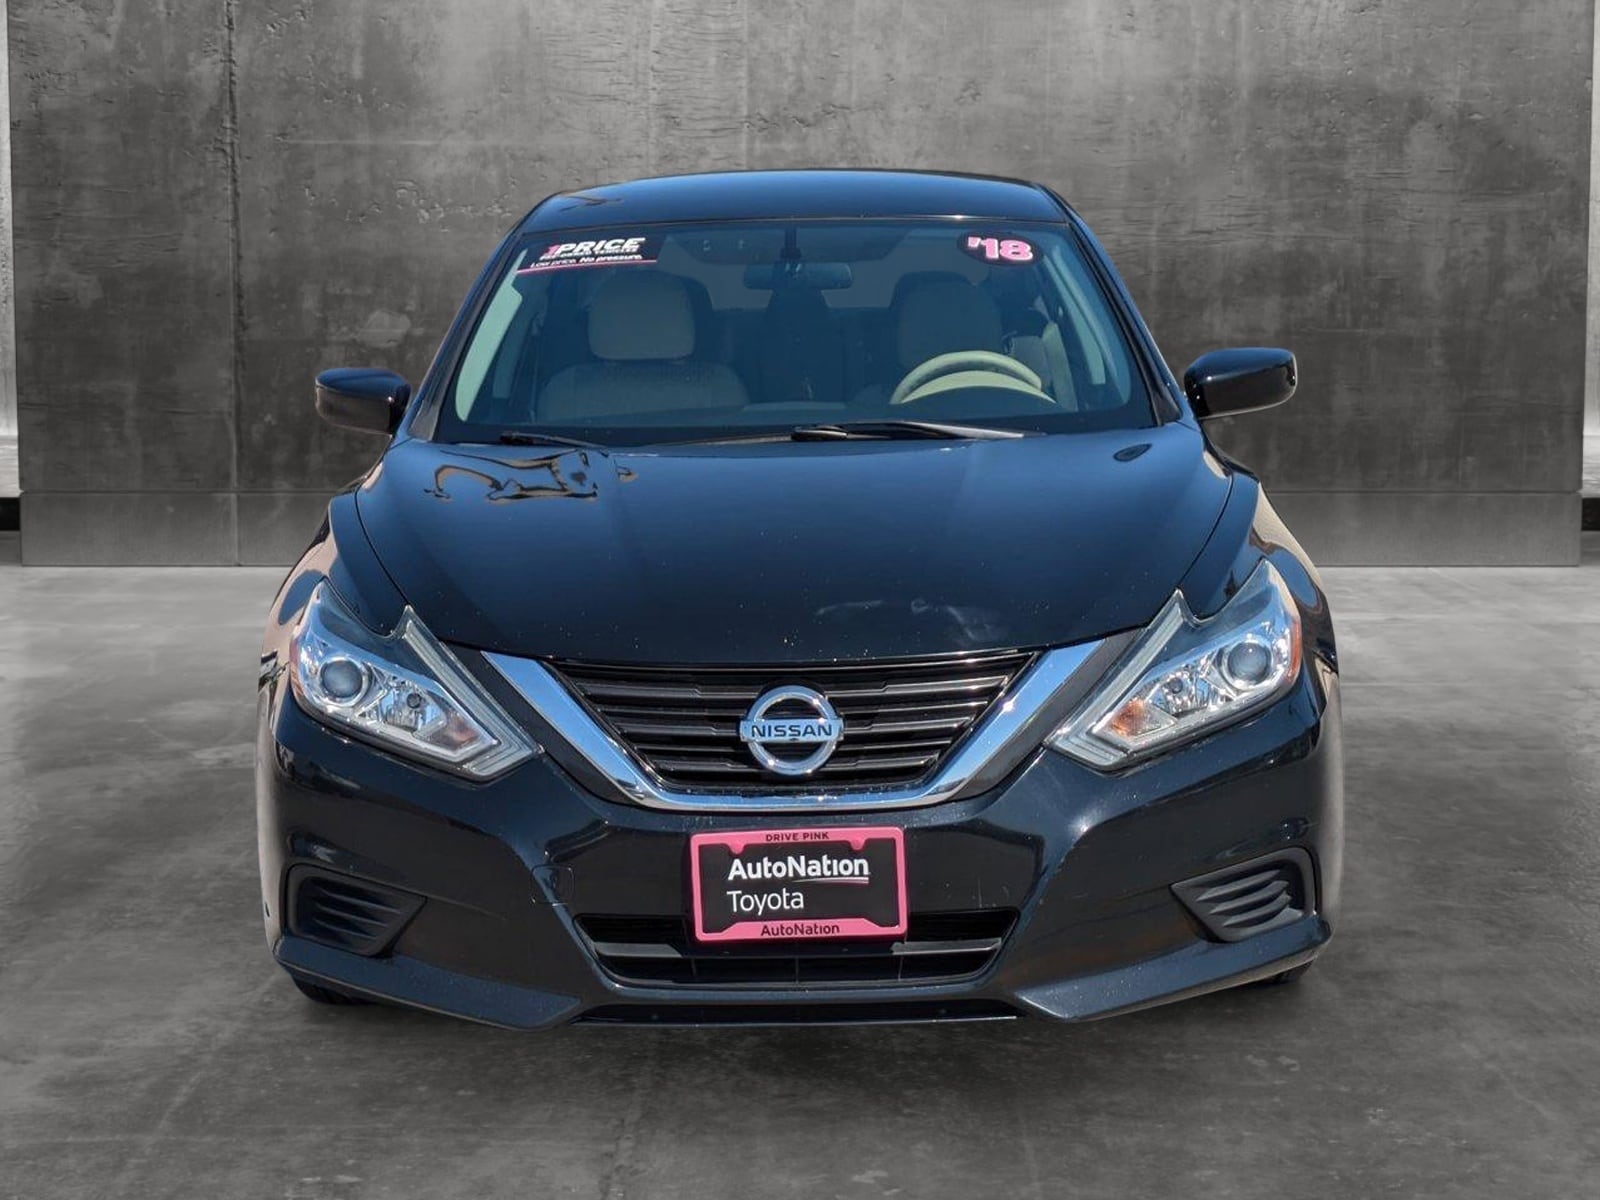 Used 2016 Nissan Altima S with VIN 1N4AL3APXGN311964 for sale in Las Vegas, NV